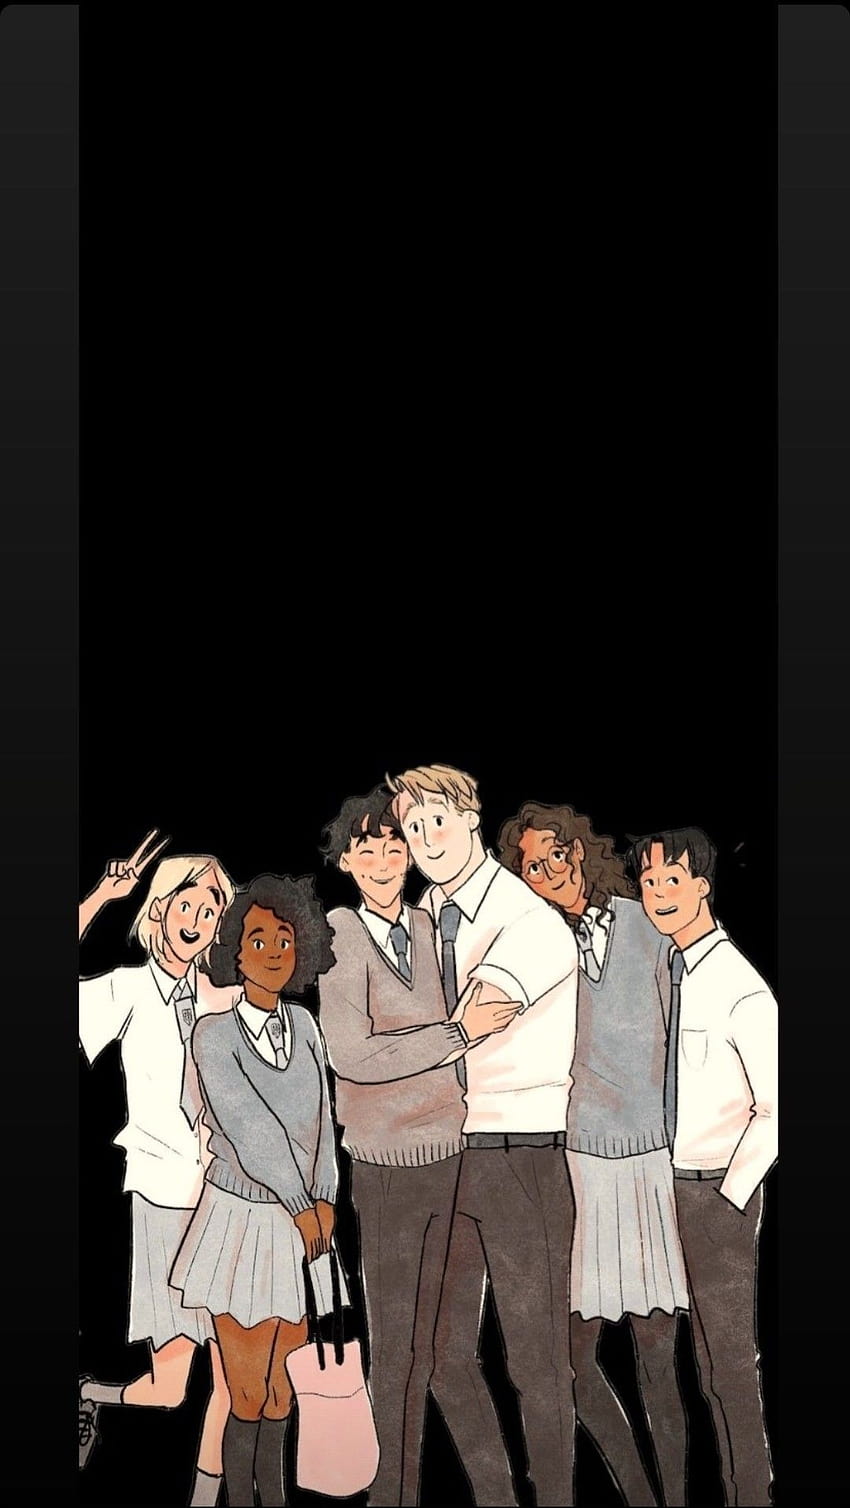 Im not your protagonist Im not even my own  Heartstopper Comic Vol1  lockscreens  If using